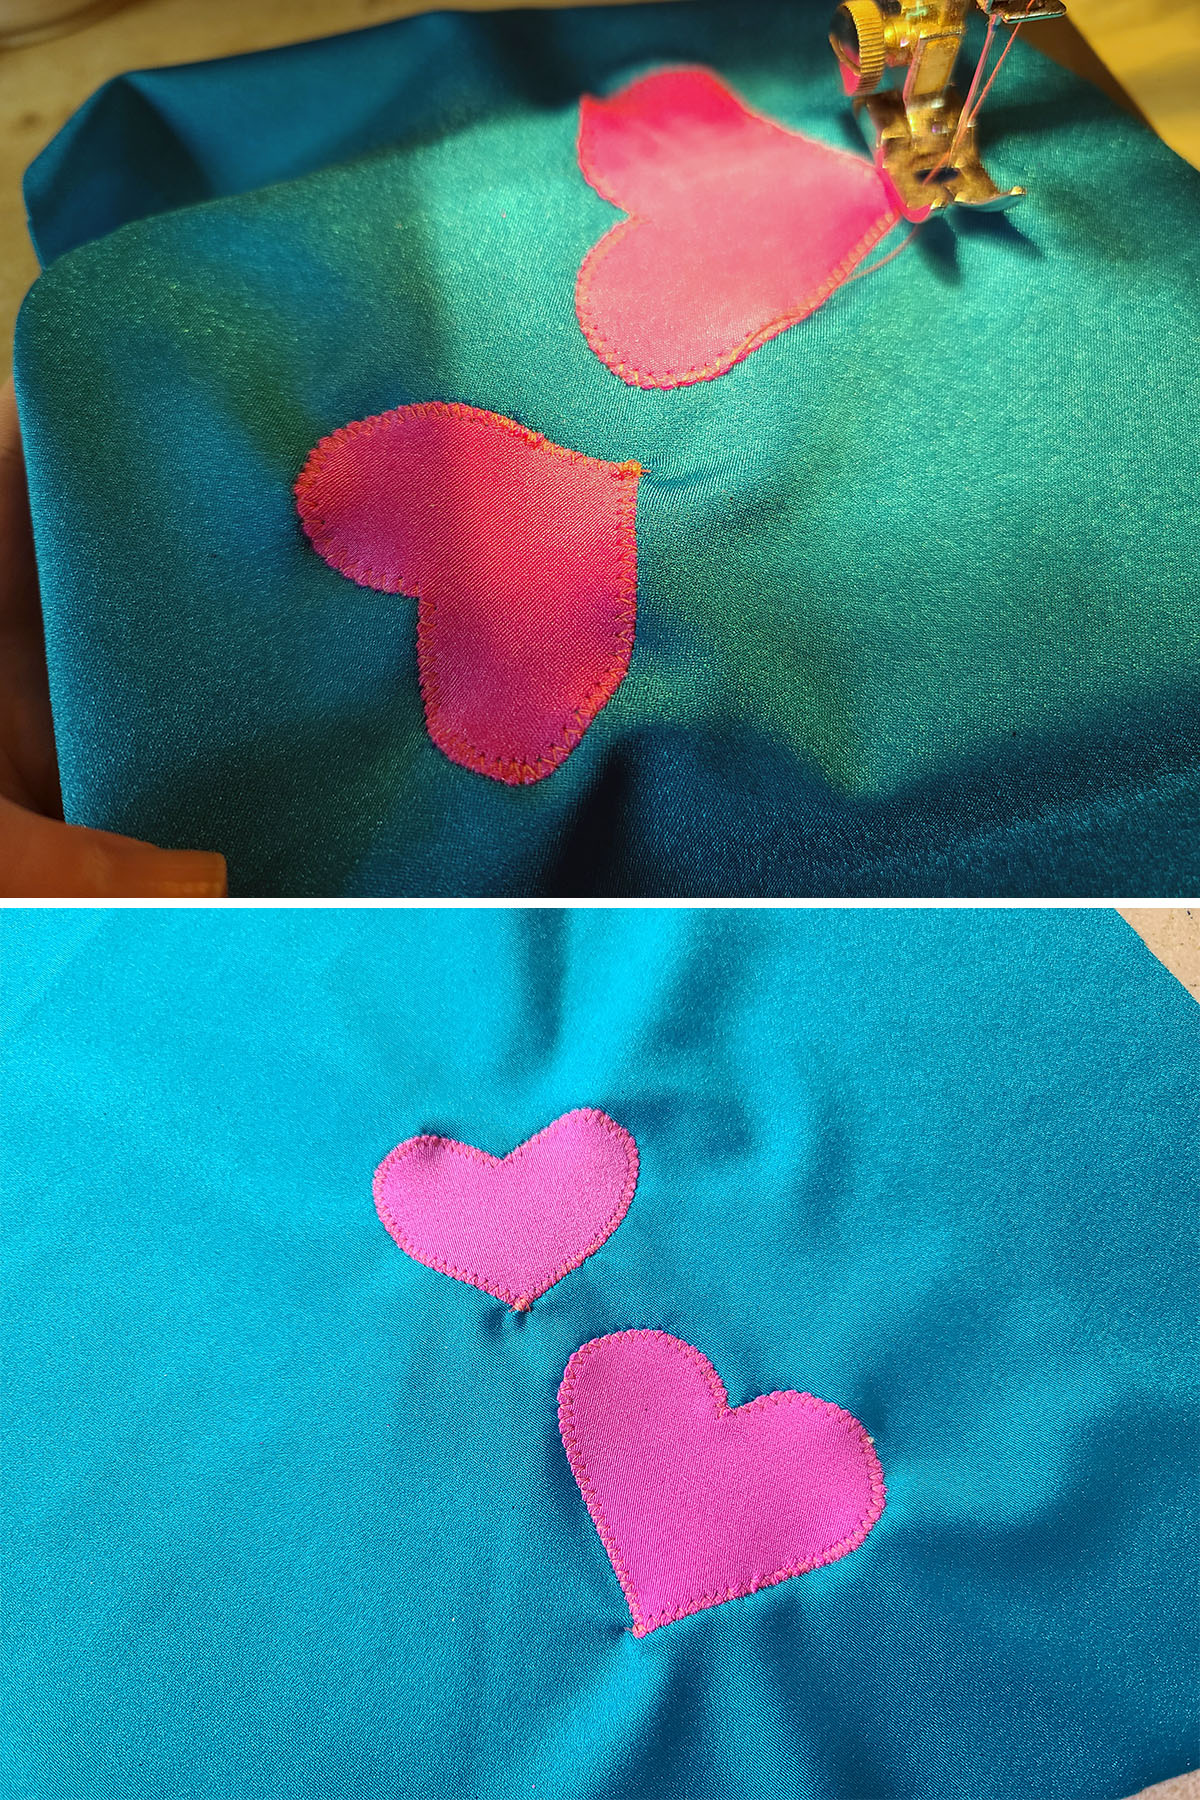 A 2 part image showing pink hearts being sewn onto a turquoise skating skirt.